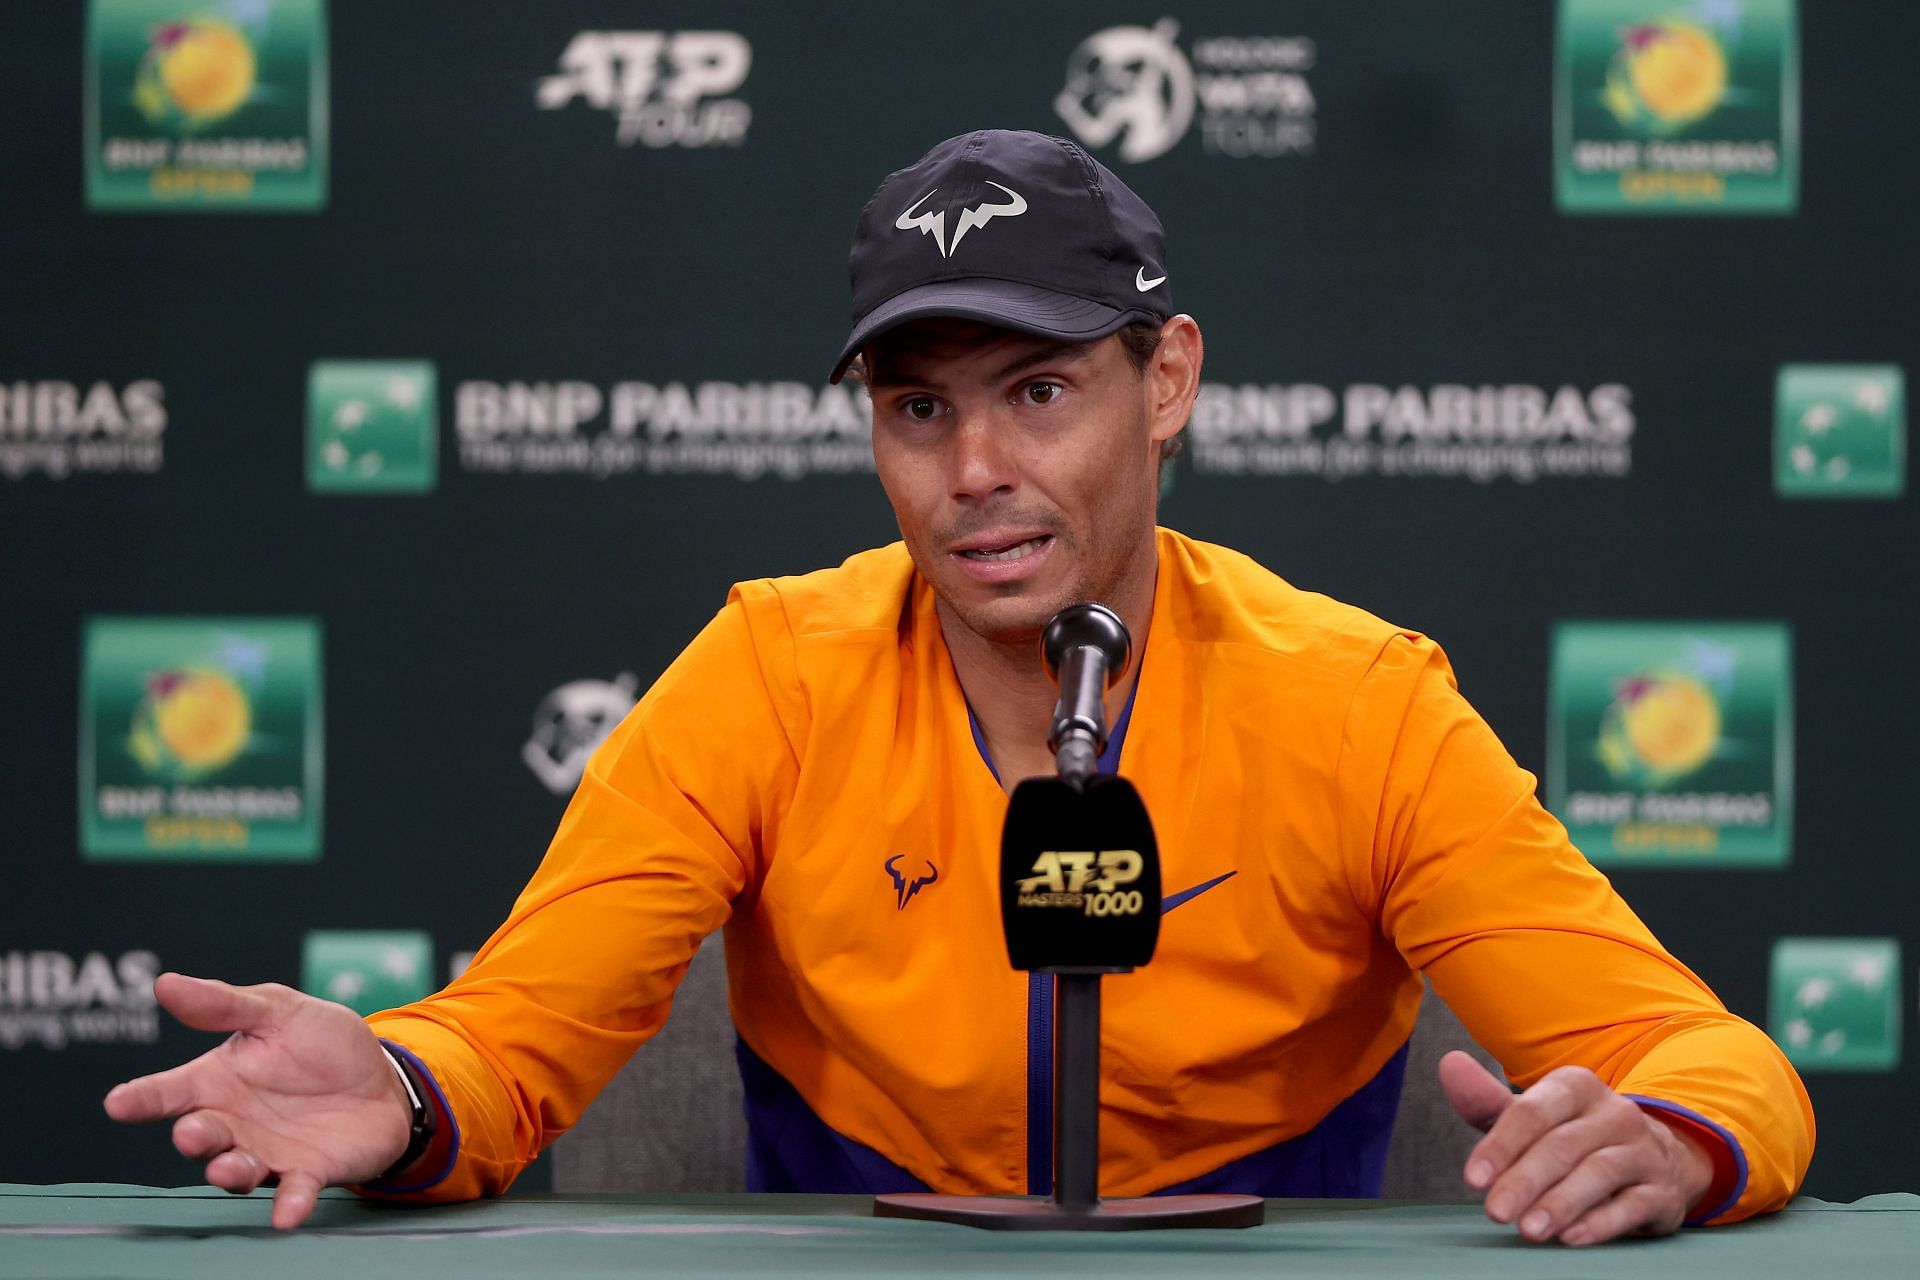 Rafael Nadal has said that he is happy with the way he is playing at present